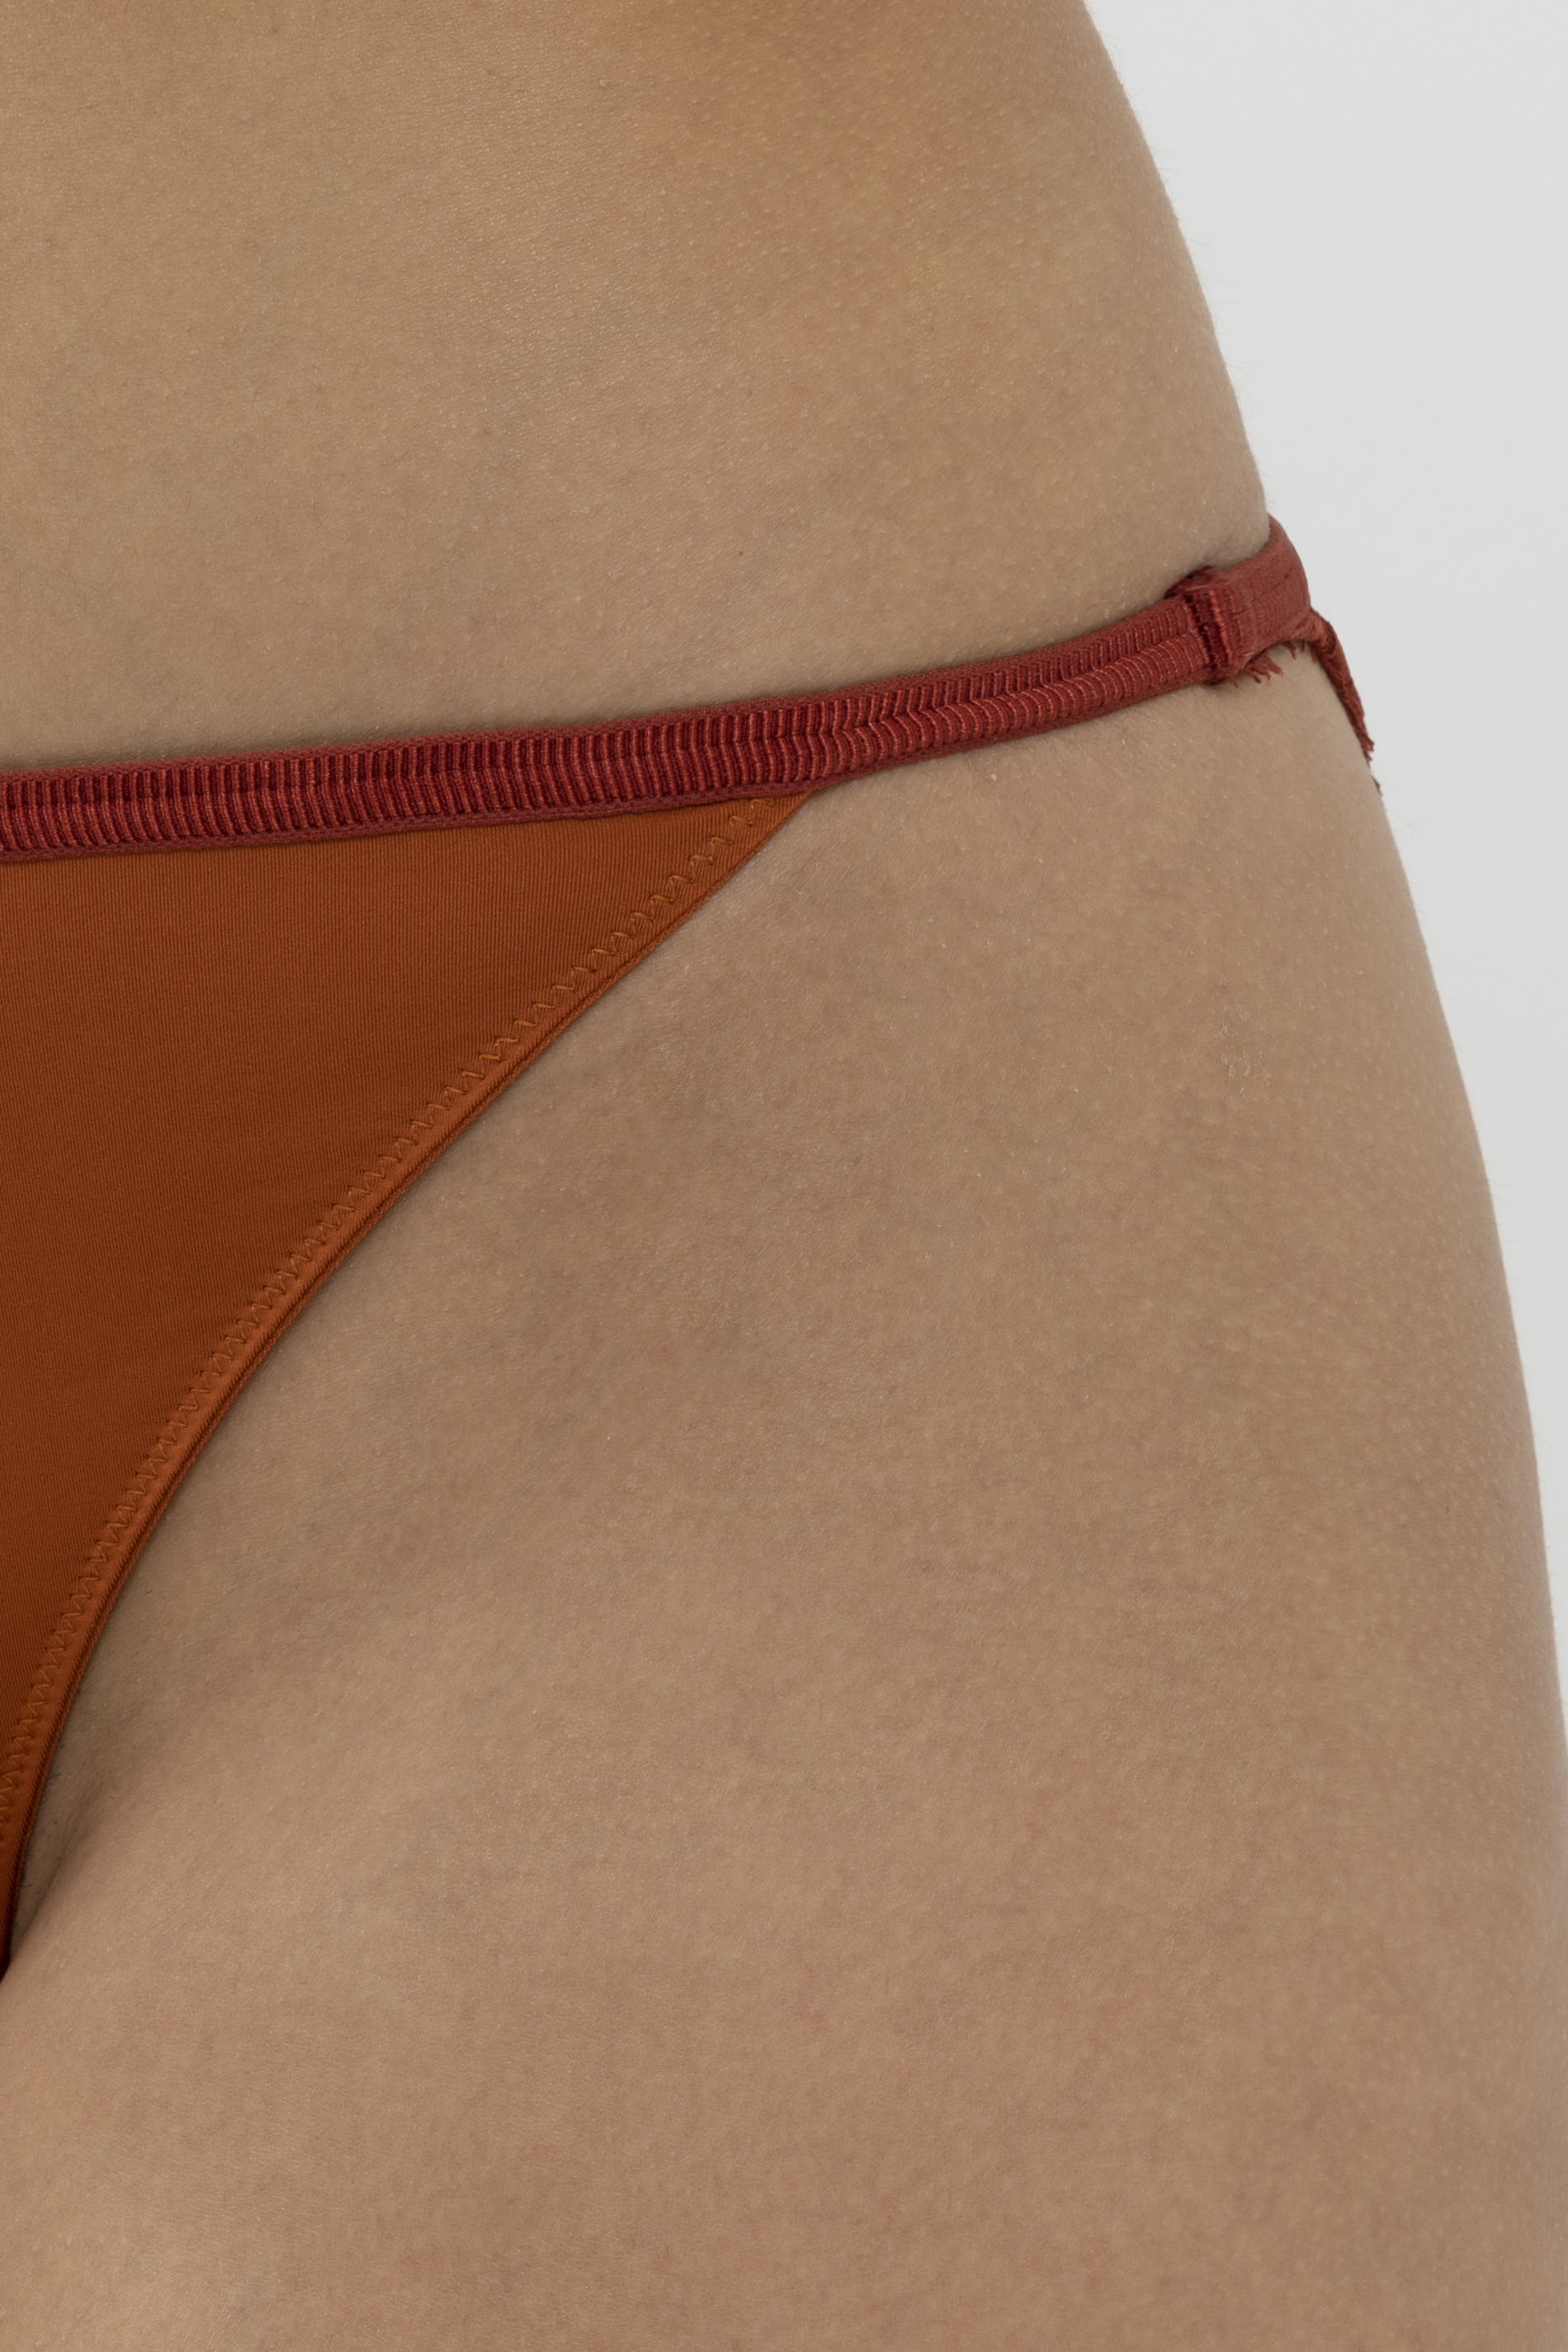 Thong Red Pepper Serie Poetry Vogue Detail View 01 | mey®